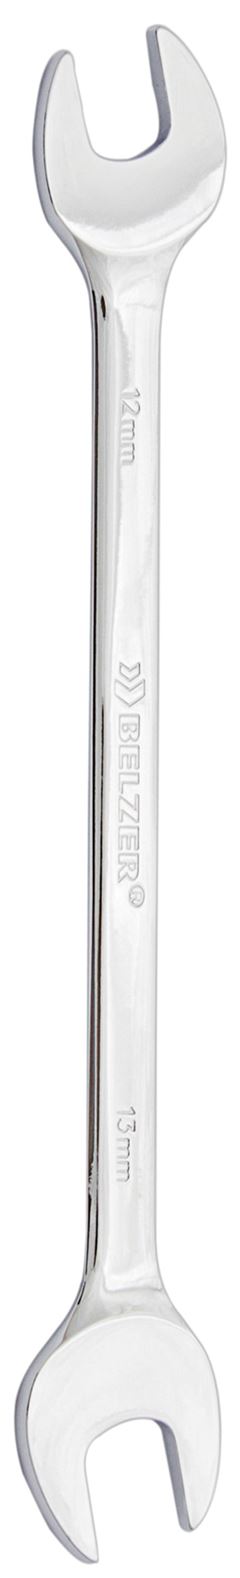 CHAVE FIXA 19X22MM BELZER